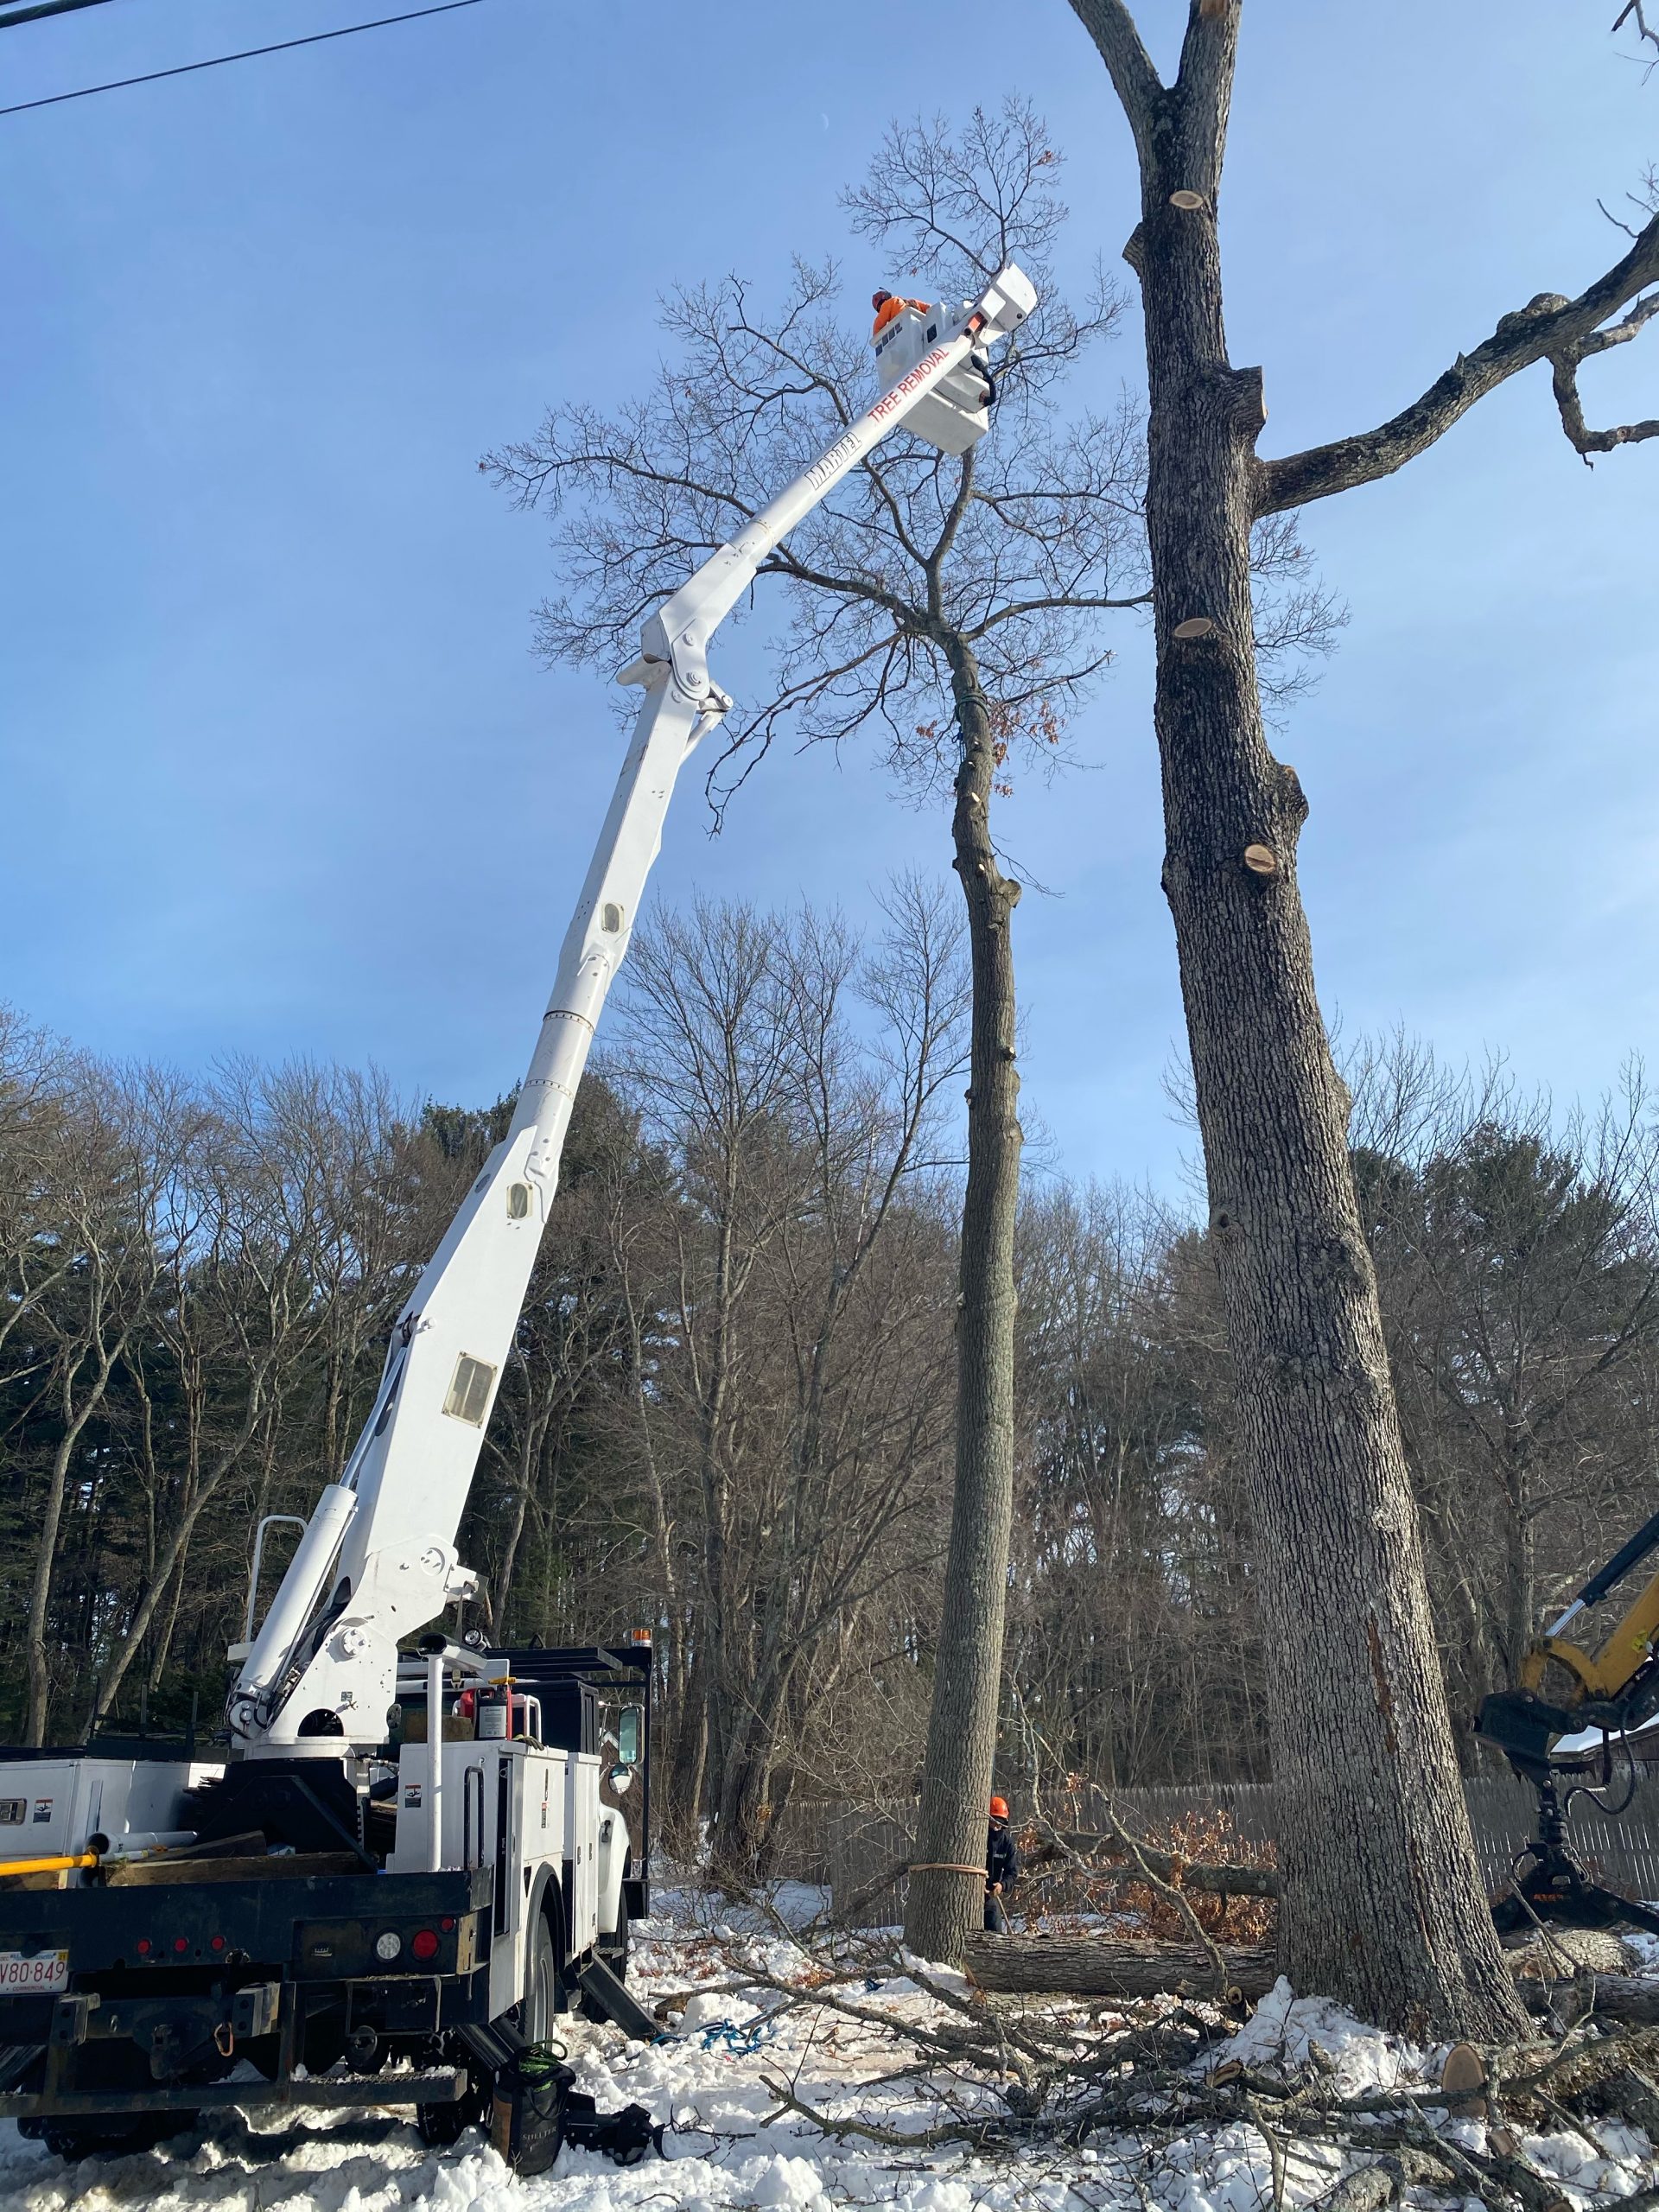 Tree Service and Removal using the Bucket Truck in Billerica, MA.